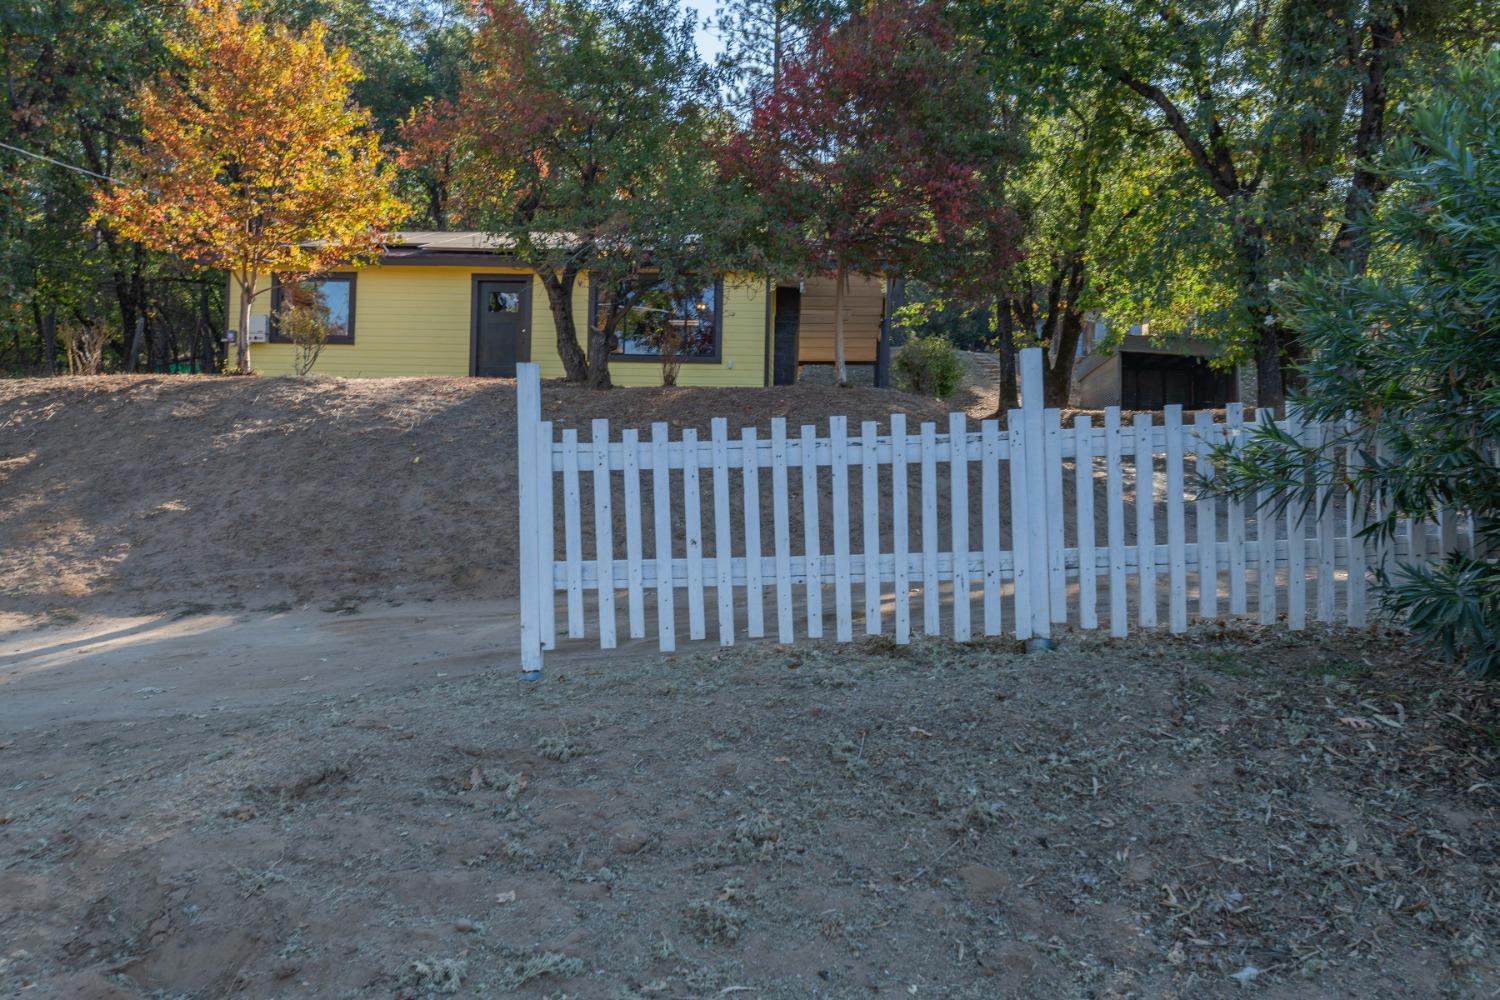 Photo of 4800 Sand Ridge Rd in Placerville, CA